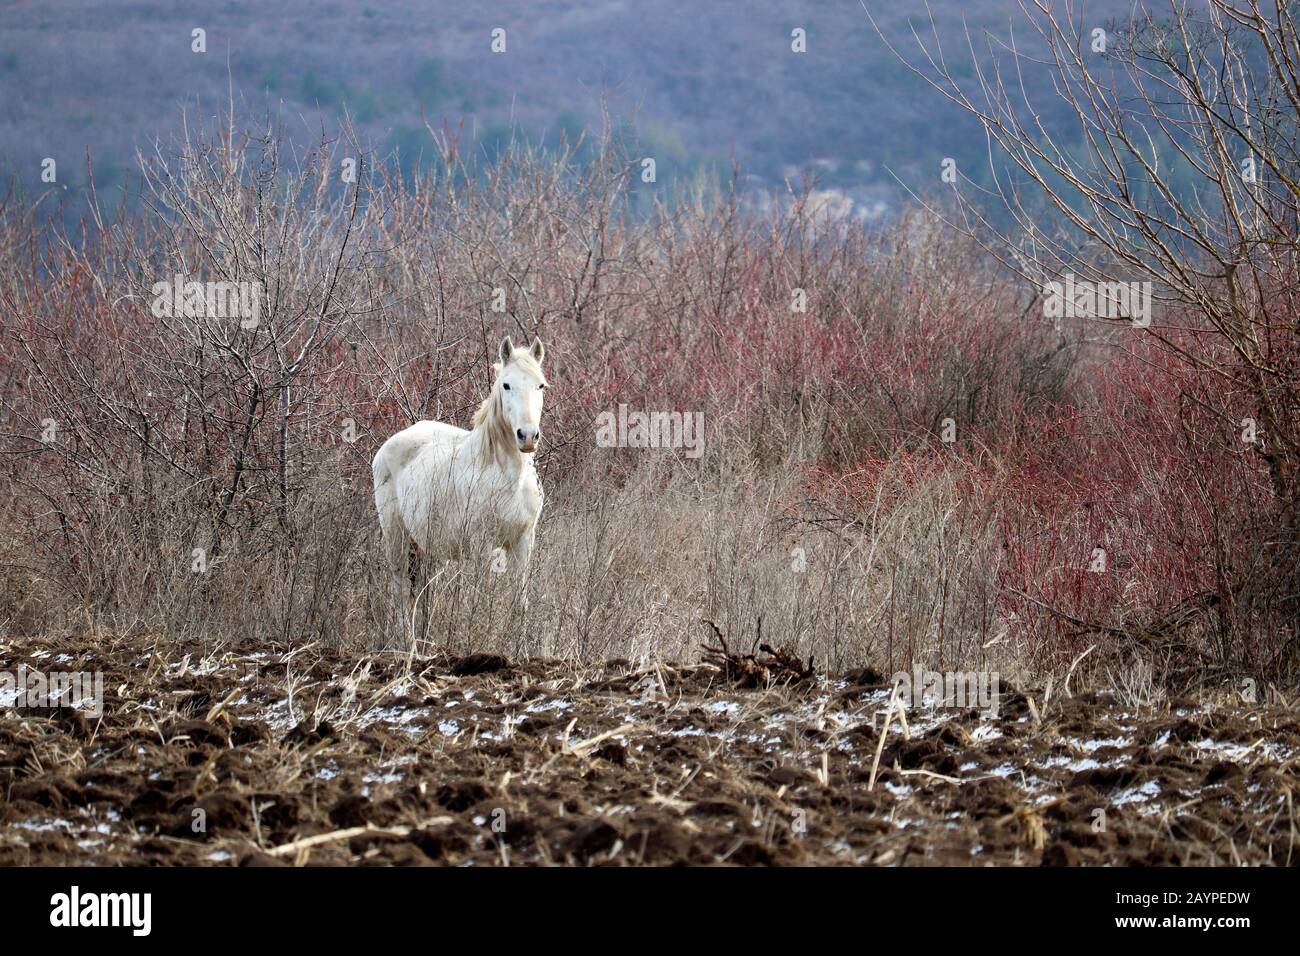 White horse grazing on ploughed field on mountain forest background. Picturesque rural landscape in early spring Stock Photo